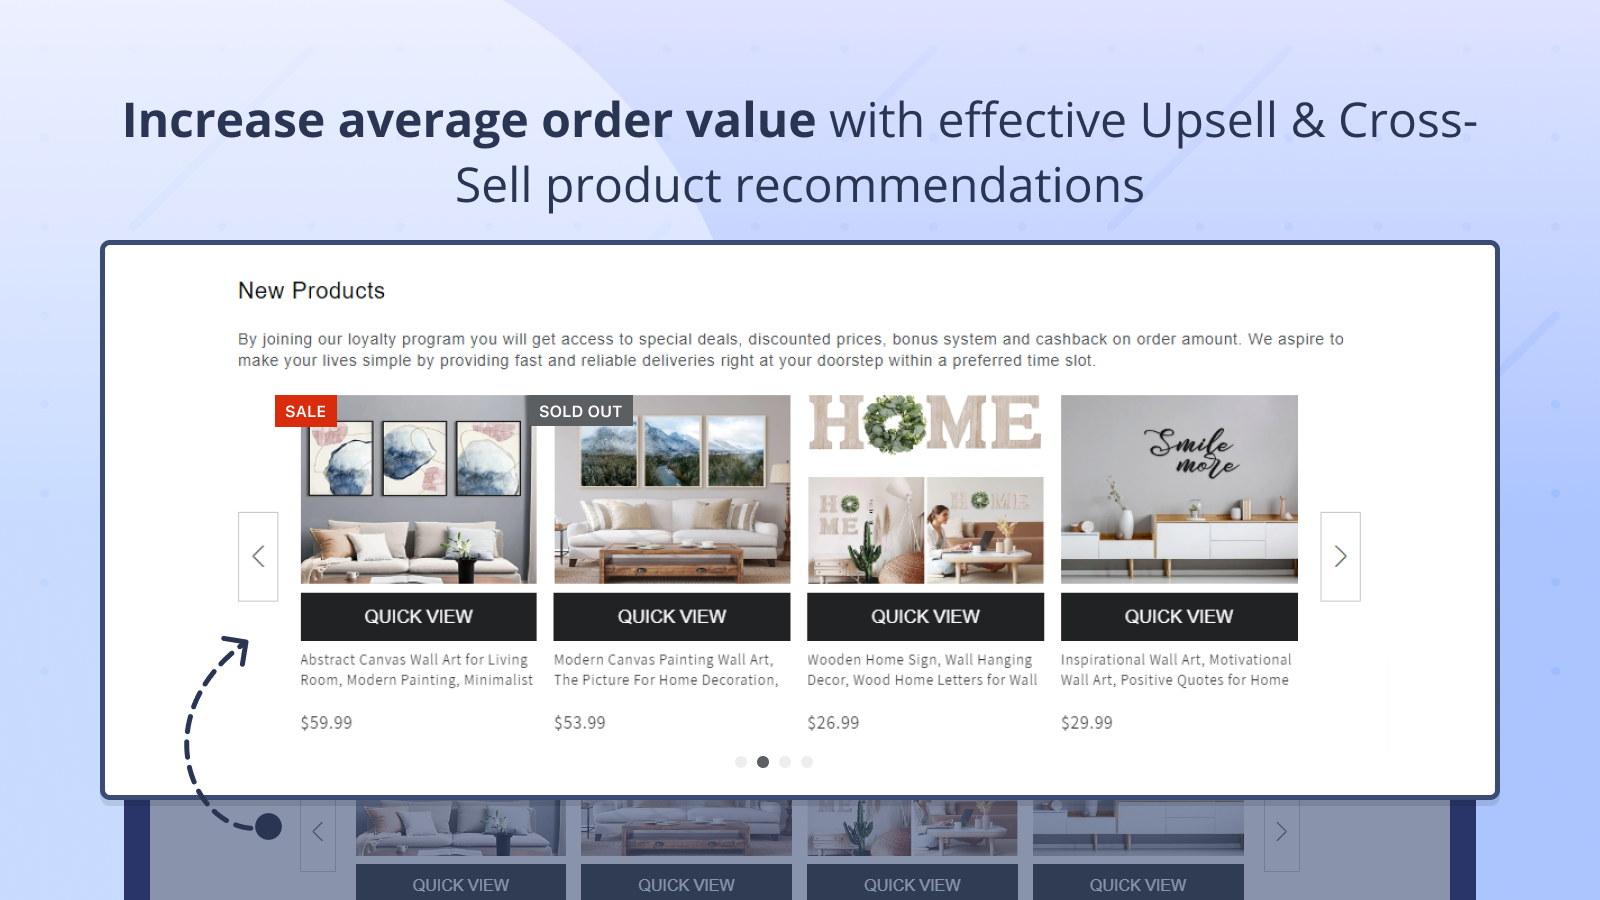 Increase average order value with product recommendations